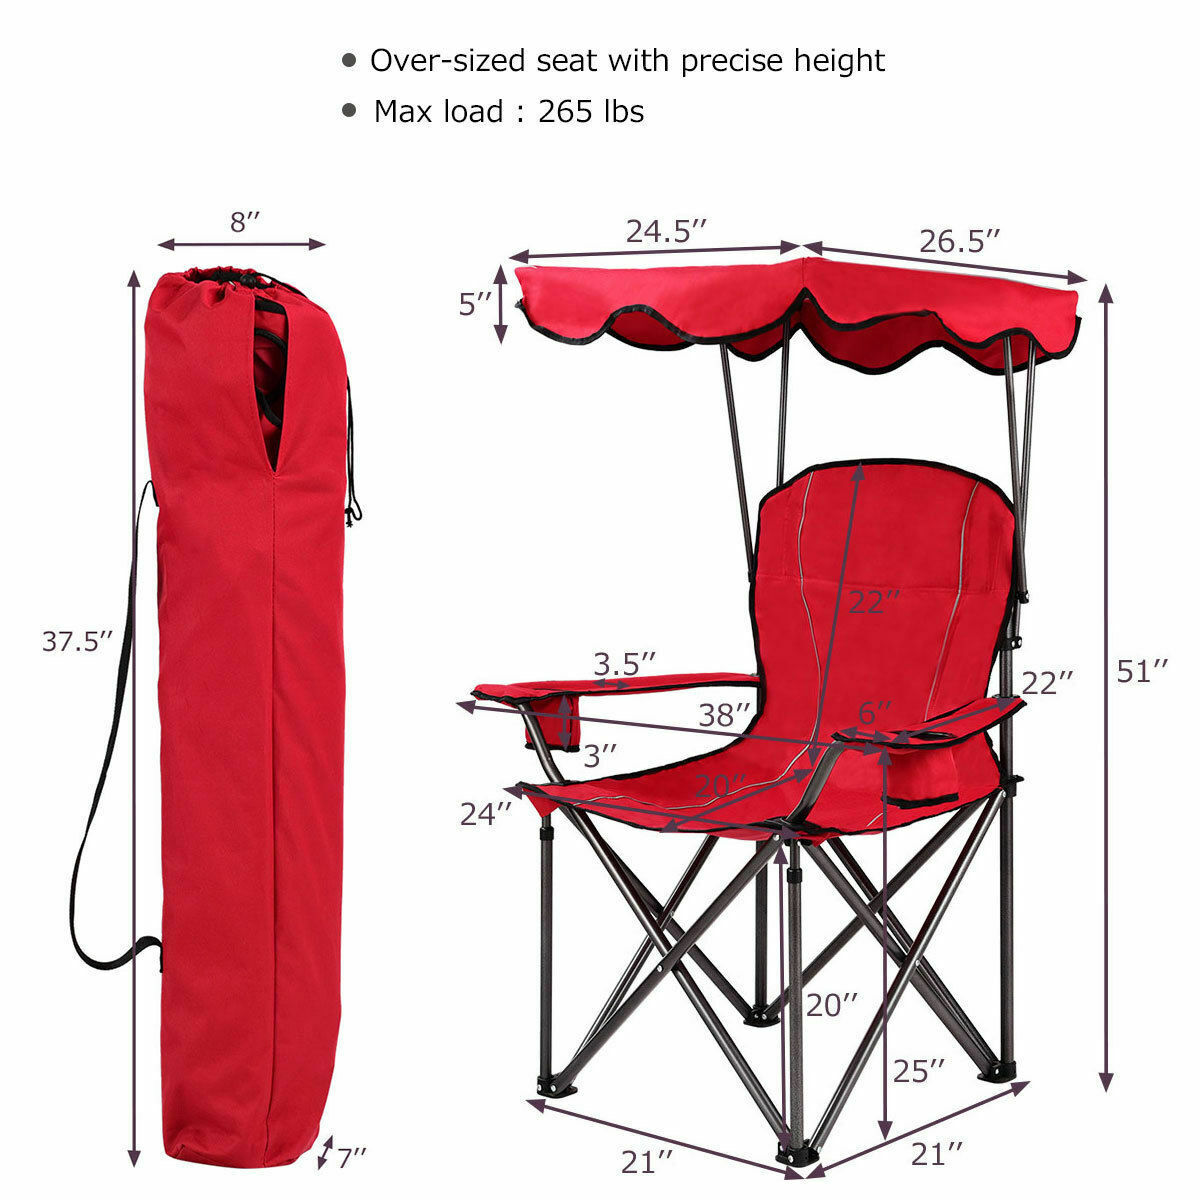 ChaiseX Portable Folding Beach Chair with Canopy Cup Holders Carrying Bag For Camping Hiking Outdoor